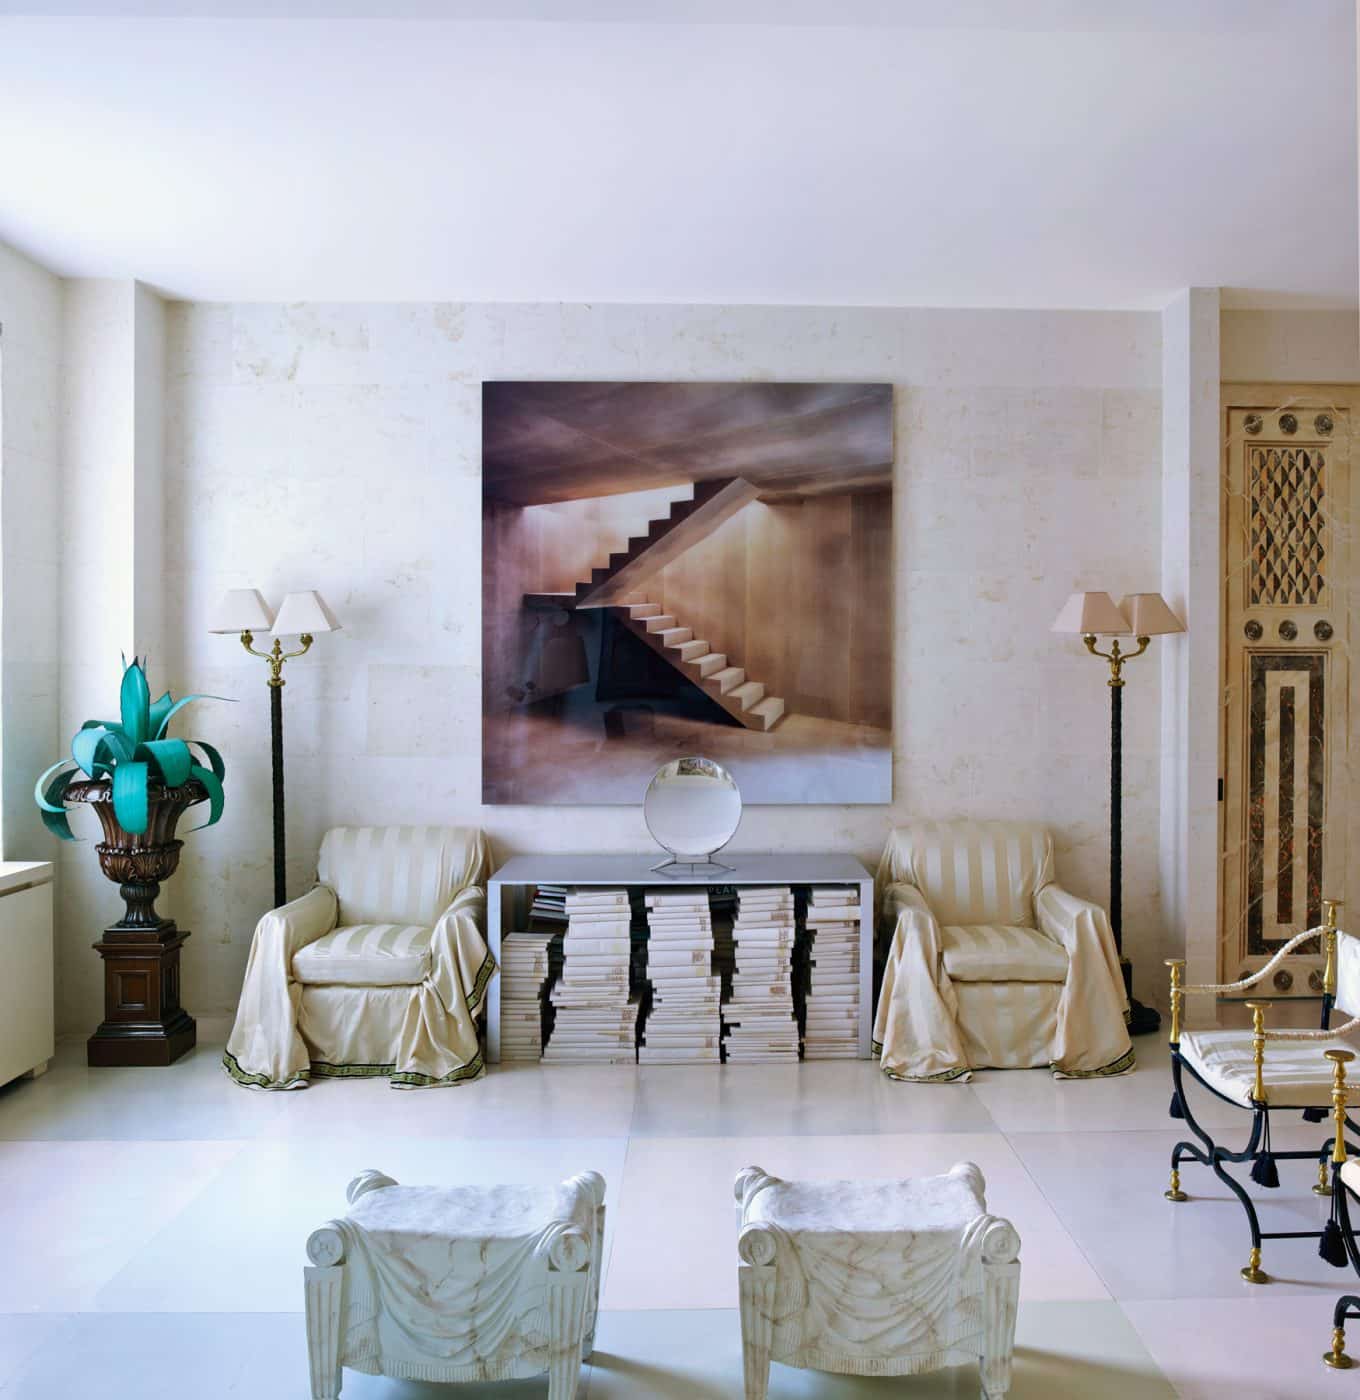 Apartment decorated by the late World of Interiors editor, Carol Prisant